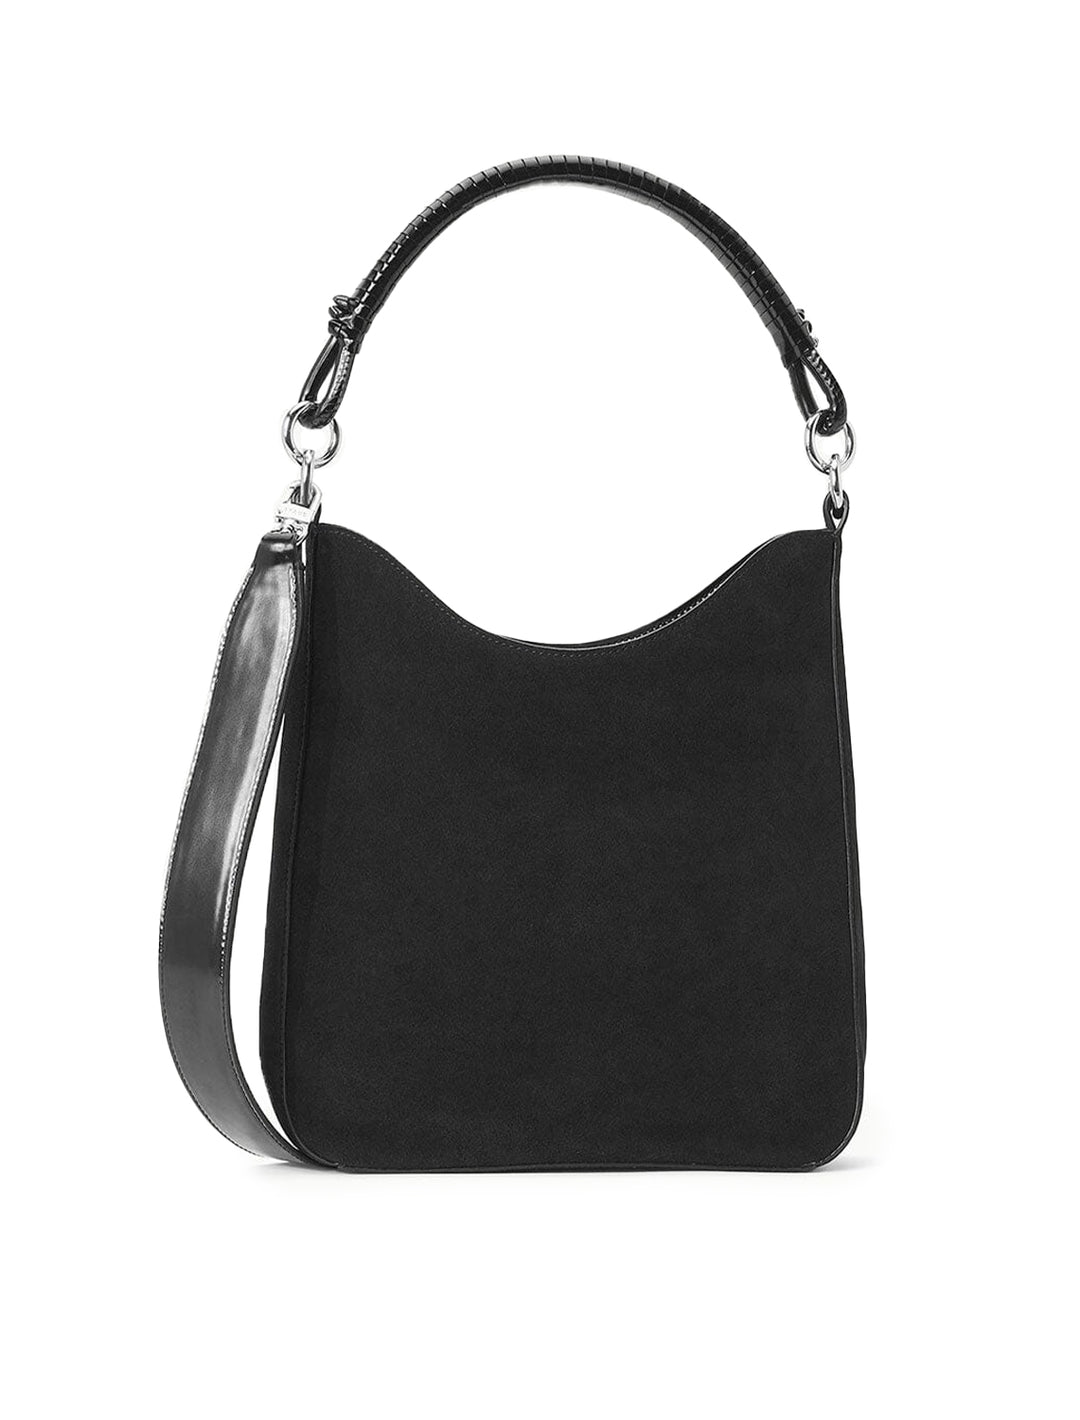 Front view of STAUD's mel bag in black.